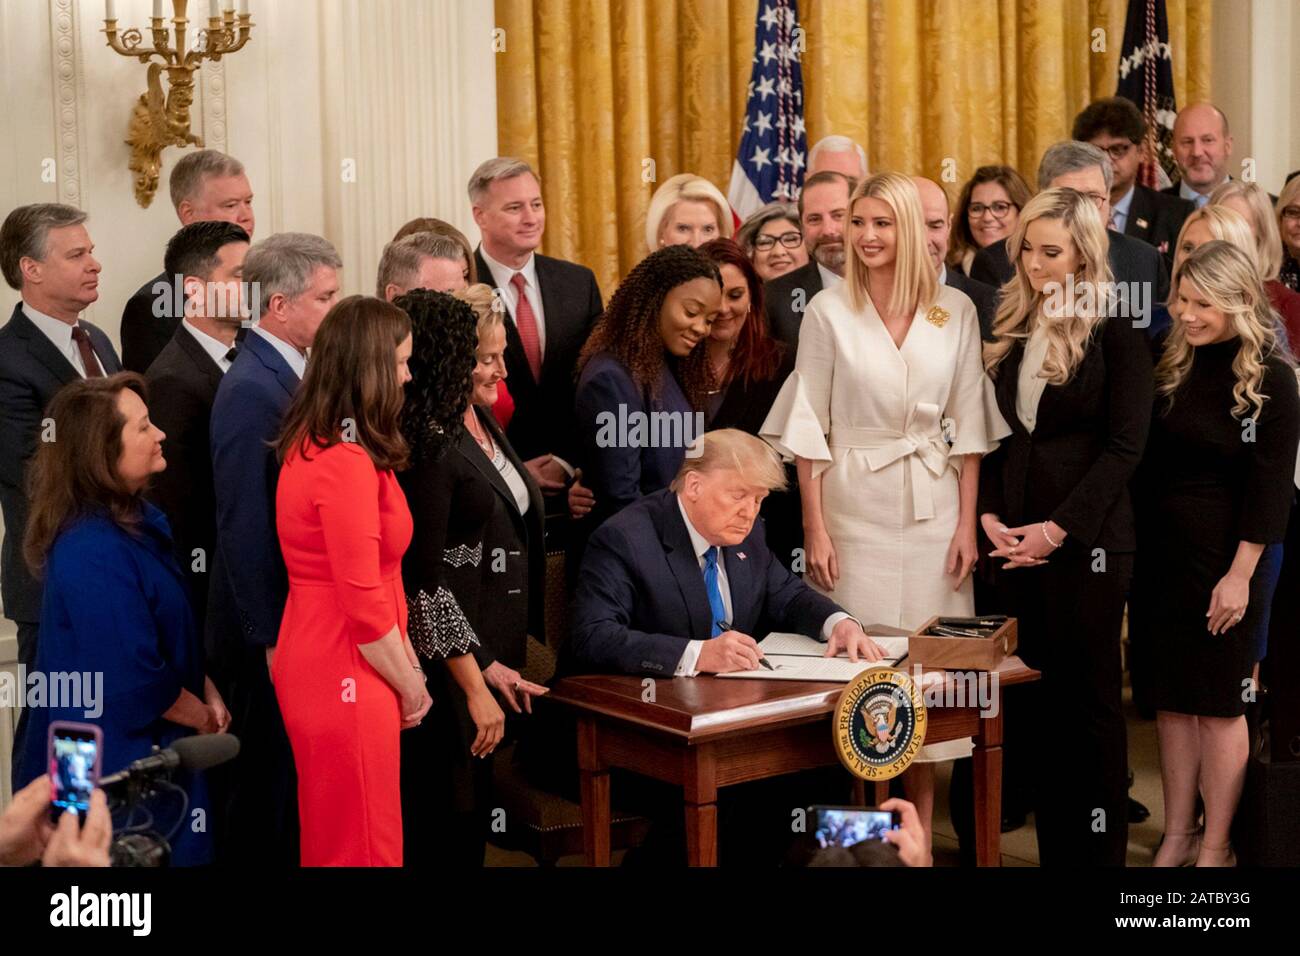 Washington, United States Of America. 31st Jan, 2020. Washington, United States of America. 31 January, 2020. U.S President Donald Trump, surrounded by survivors, officials and his daughter Ivanka Trump, right, signs an executive order to help combat human trafficking during a ceremony in the East Room of the White House January 31, 2020 in Washington, DC. The event took place following the White House Summit on Human Trafficking in honor of the 20th Anniversary of the Trafficking Victims Protection Act. Credit: Andrea Hanks/White House Photo/Alamy Live News Stock Photo